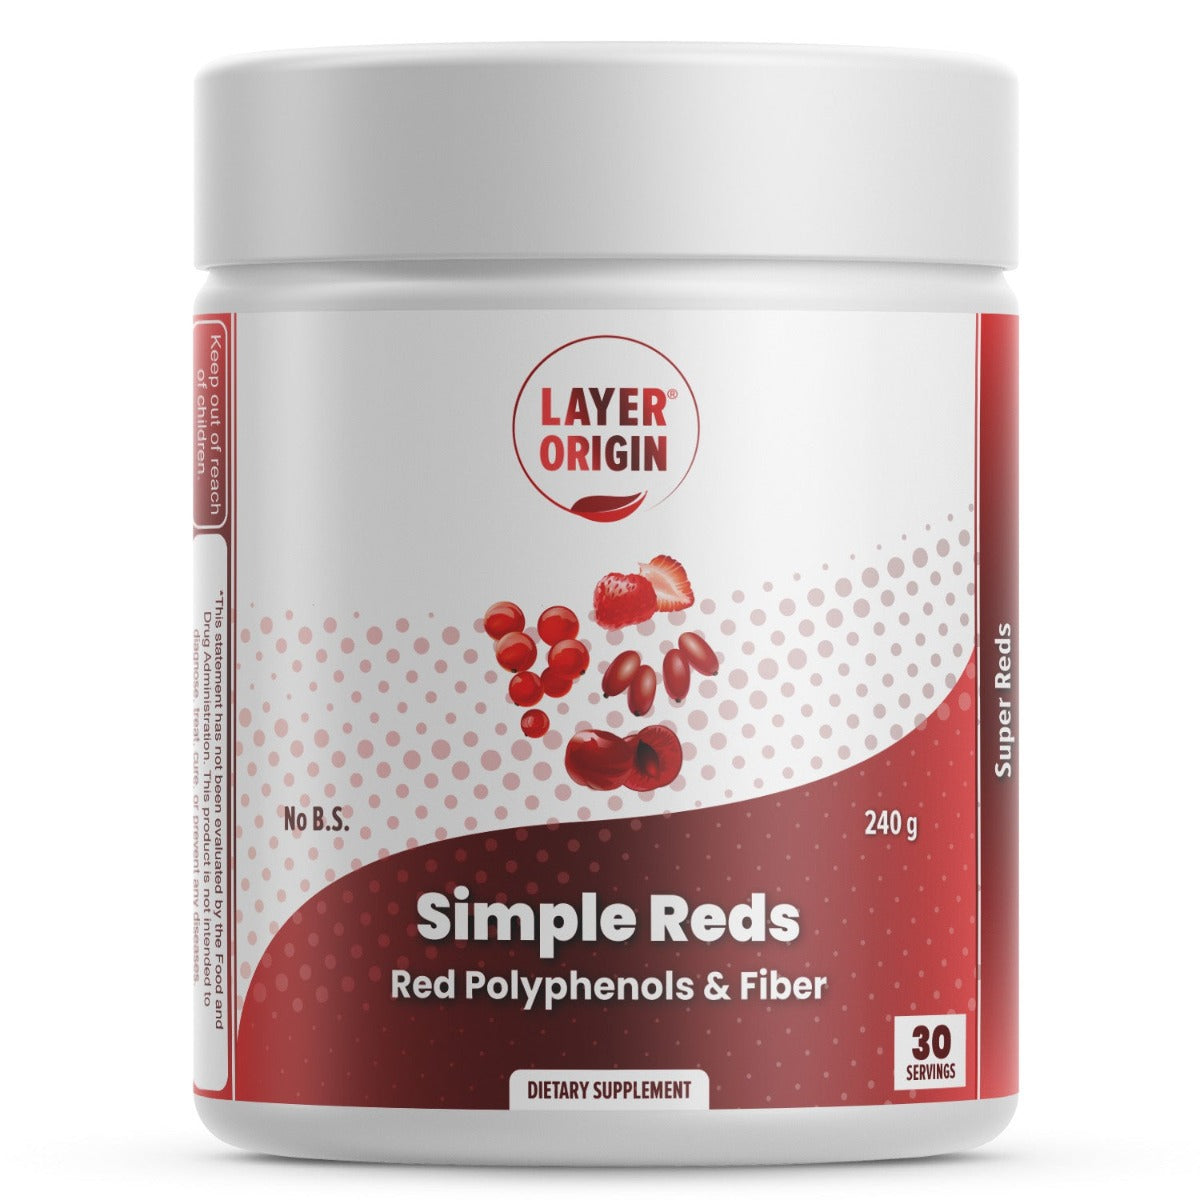 Simple Reds - Organic Red Polyphenols Fruit Powder Front Panel - Layer Origin Nutrition